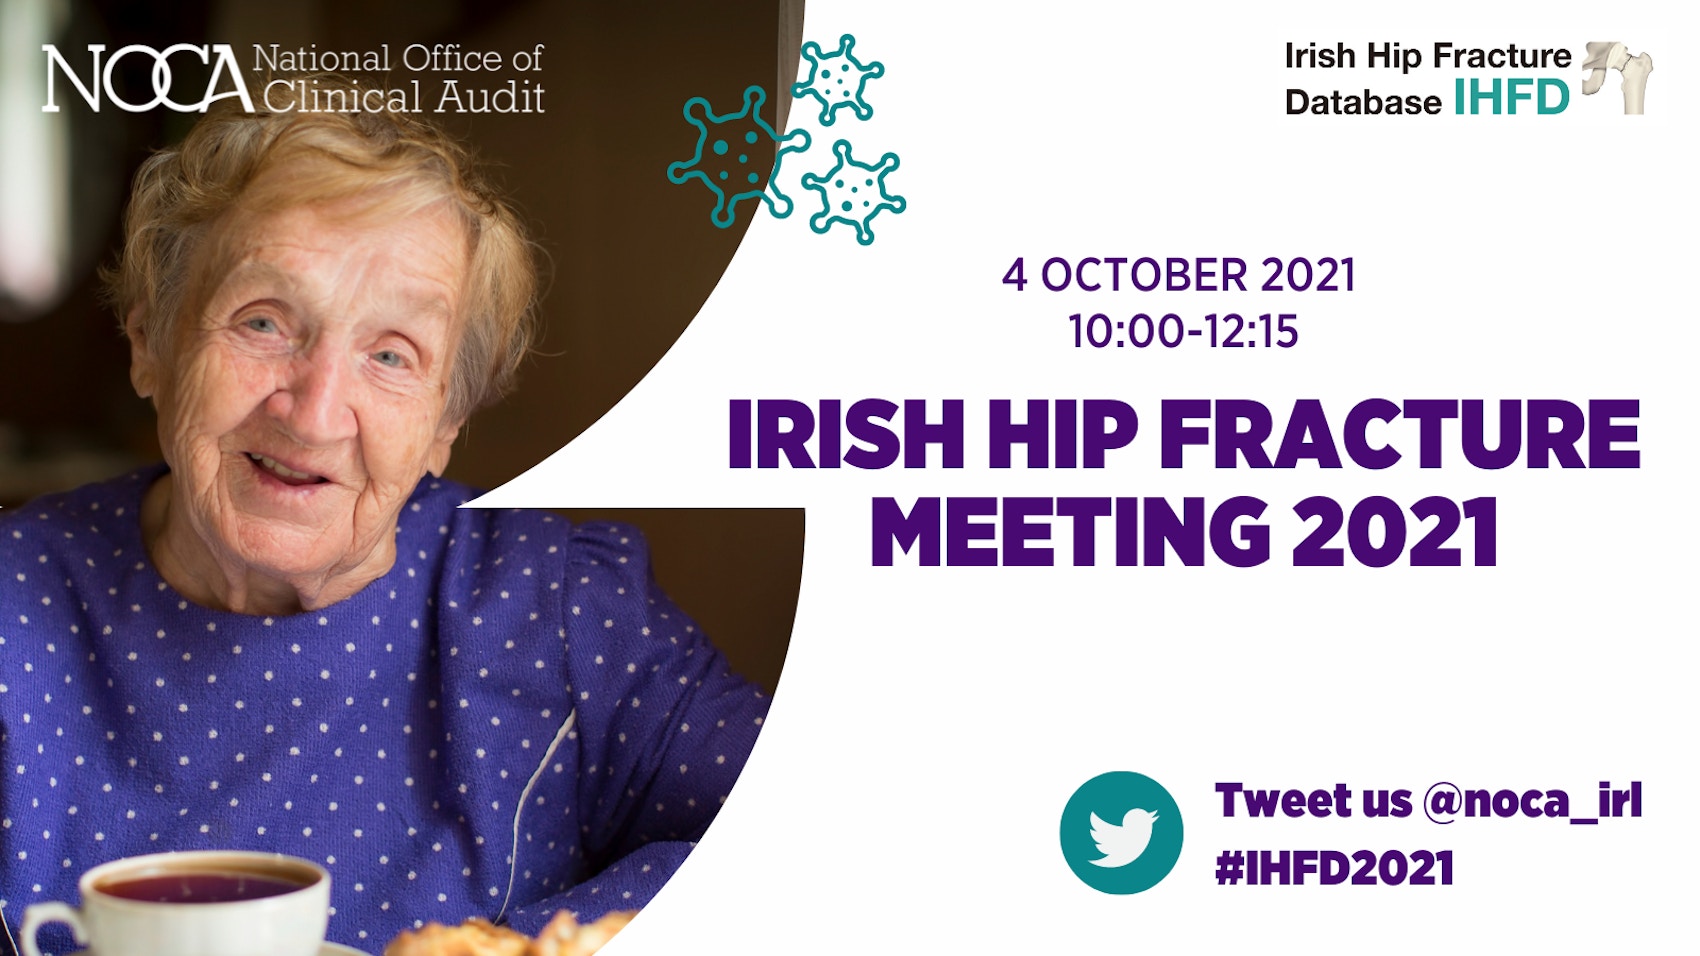 Irish Hip Fracture Meeting 2021 places importance on Being Active at Home